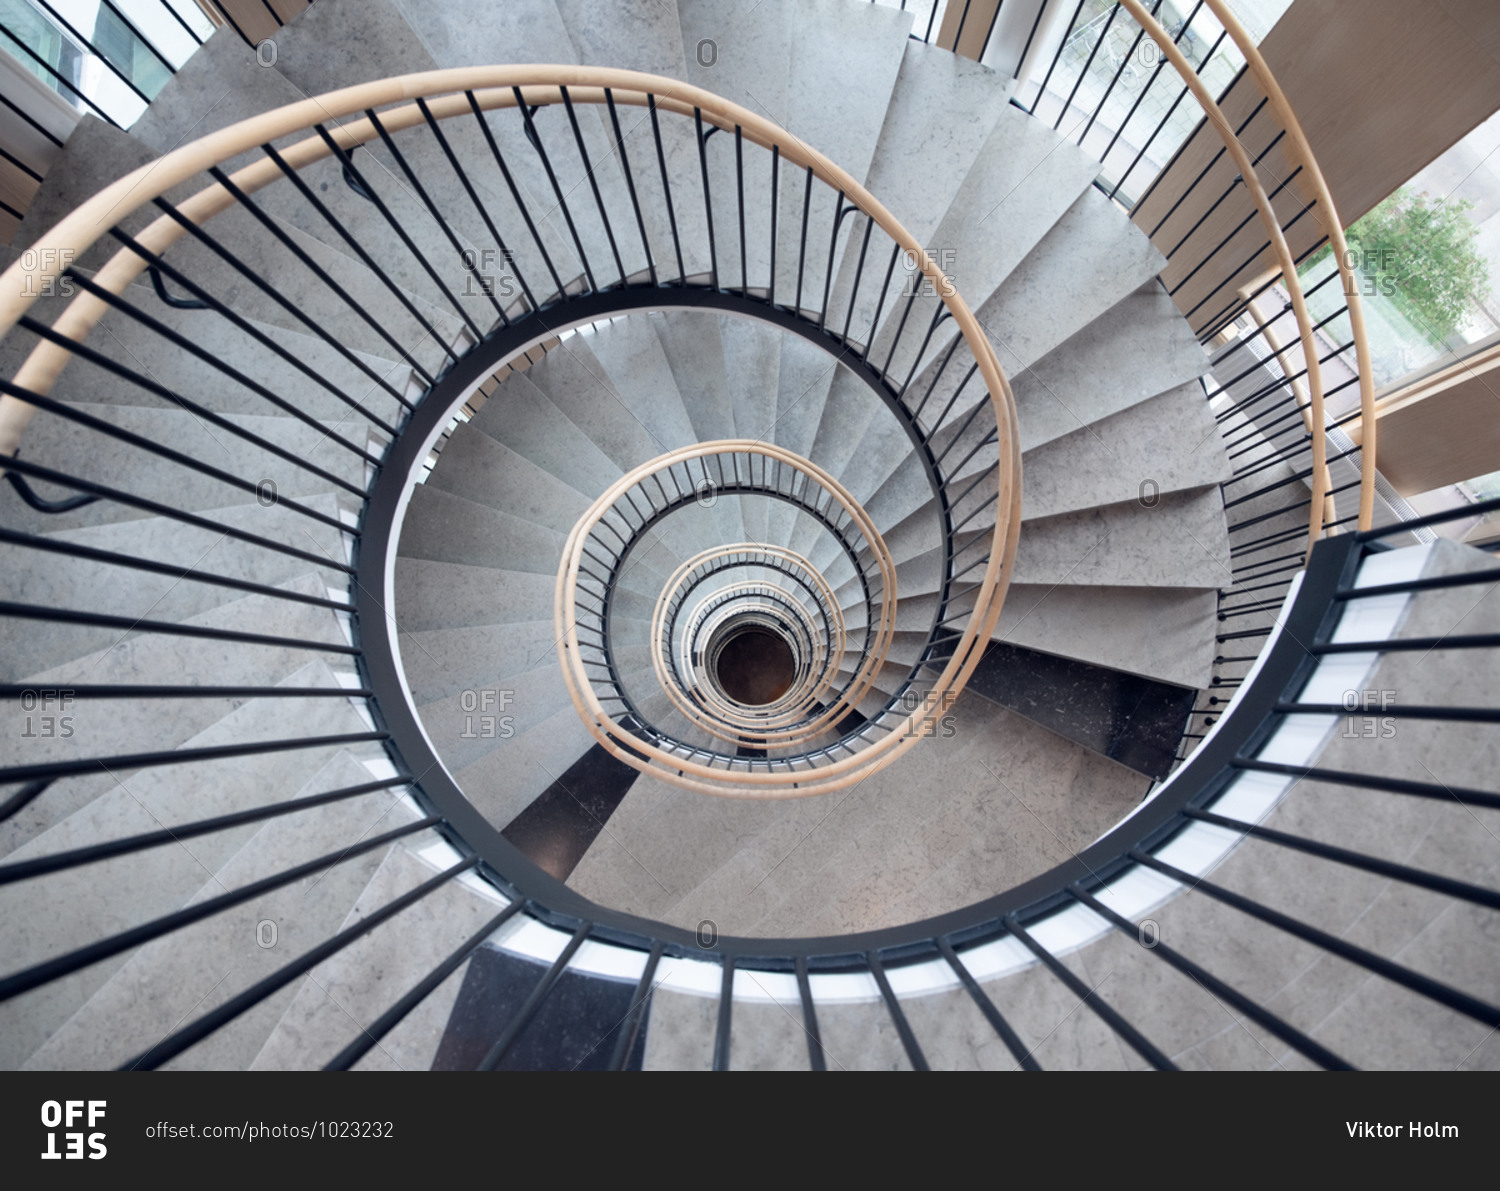 Spiral staircase of the Lund Courthouse in Lund, Sweden